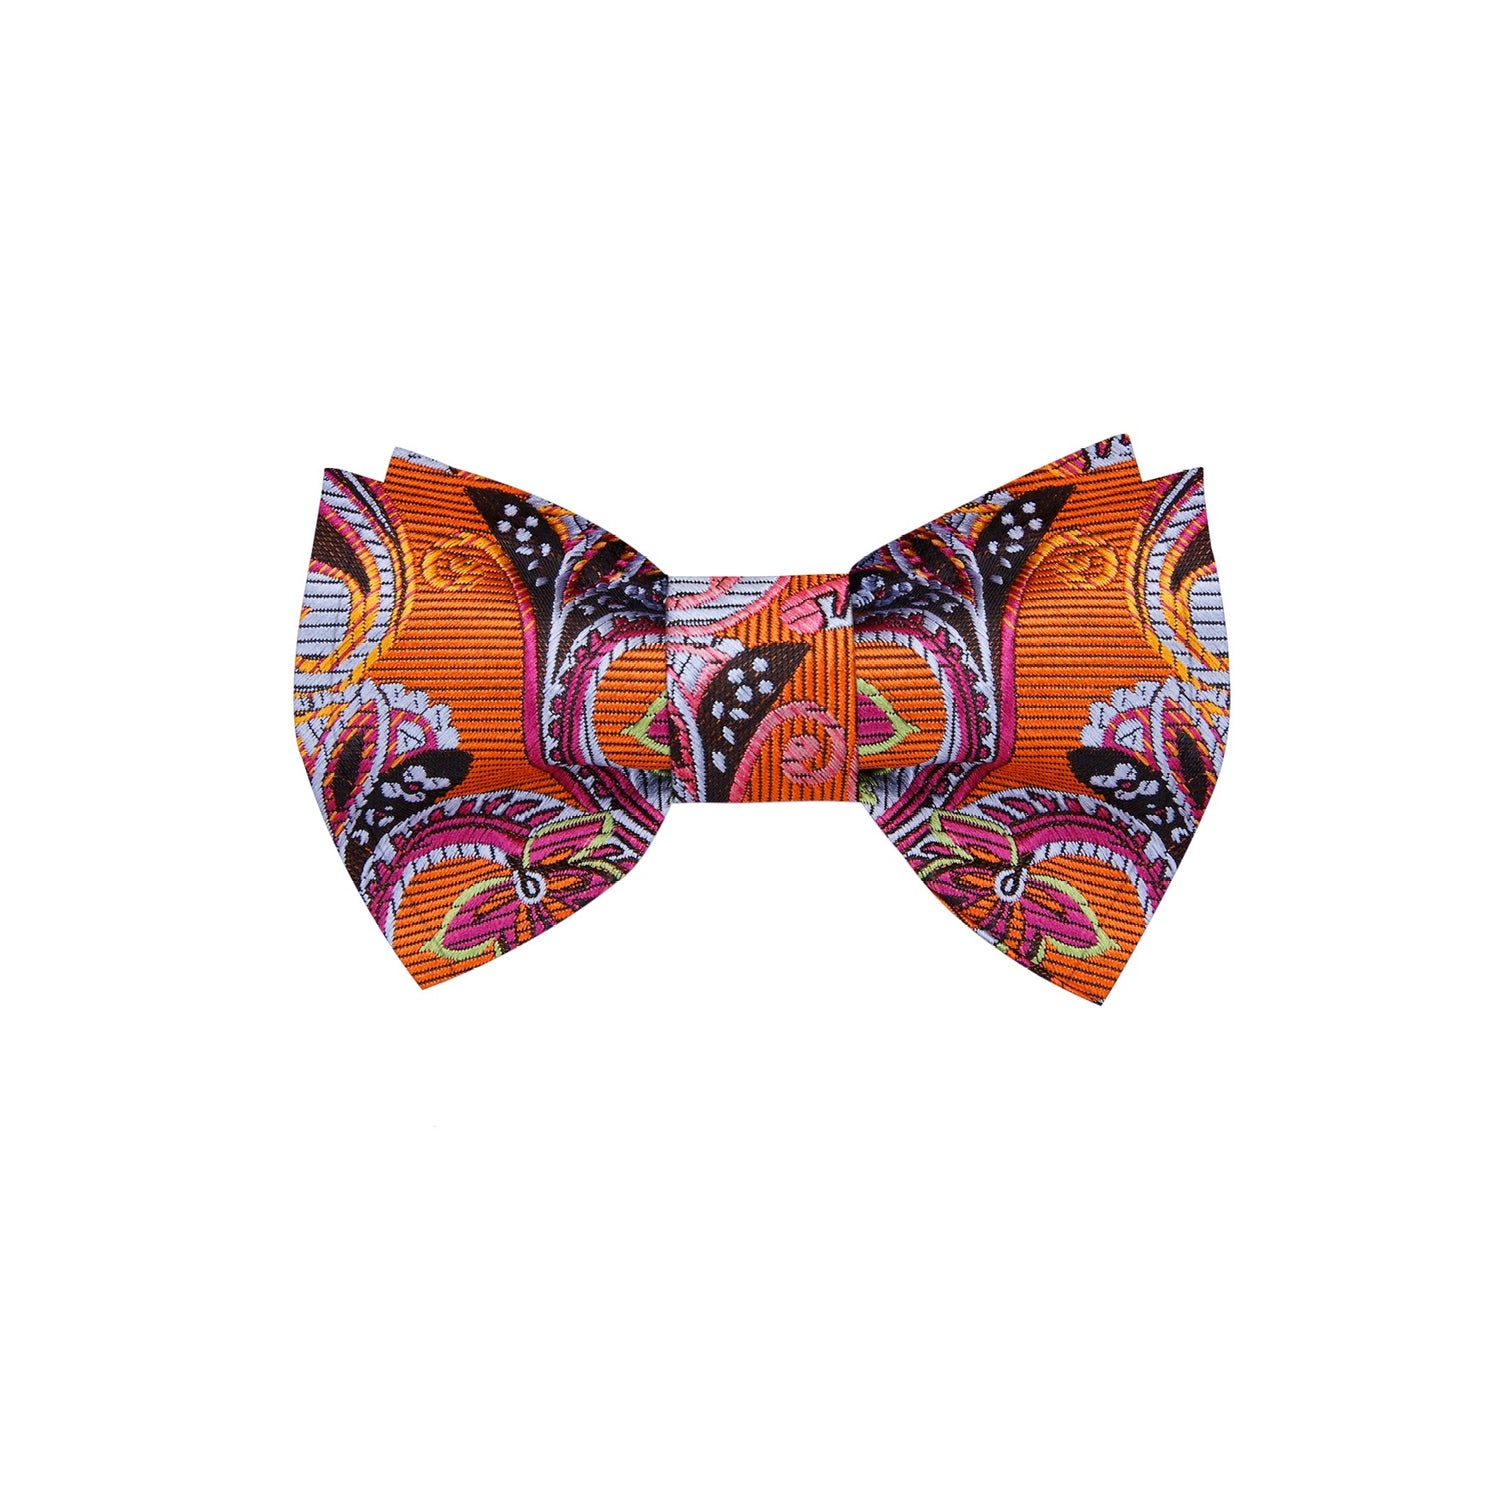 An Orange Intricate Floral with Paisley Pattern Silk Self Tie Bow Tie, 